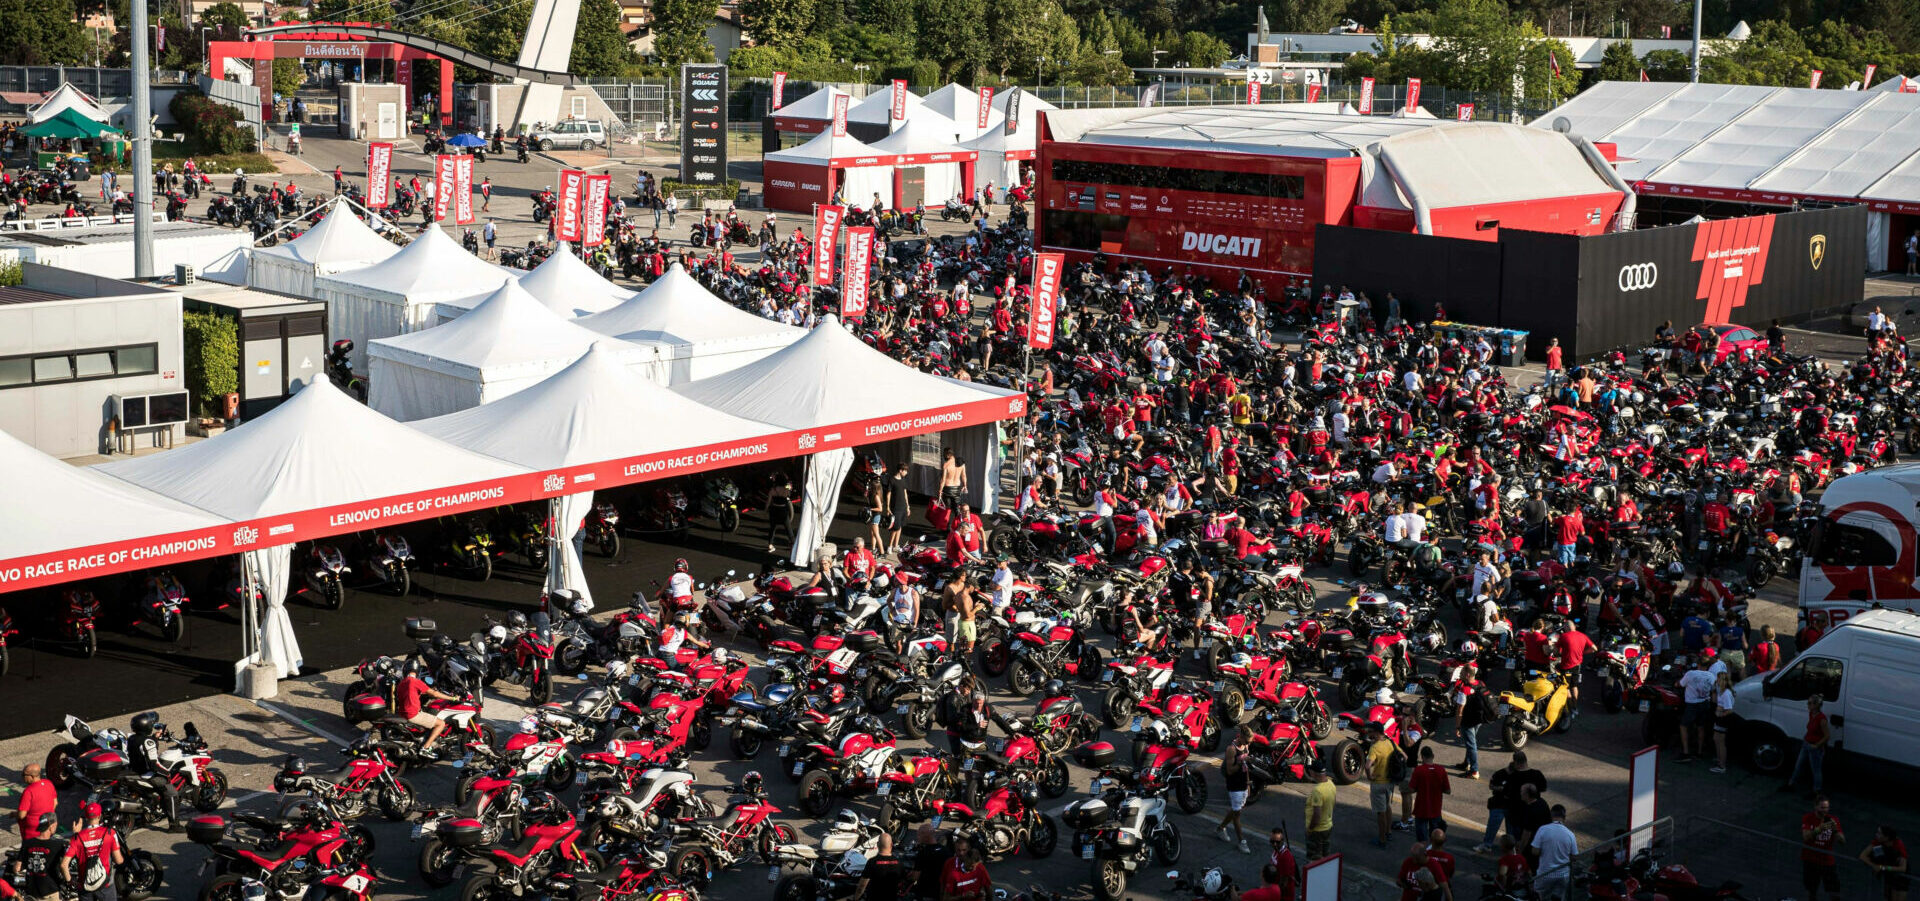 A shot of the paddock at Misano during World Ducati Week 2022. Photo courtesy Ducati.